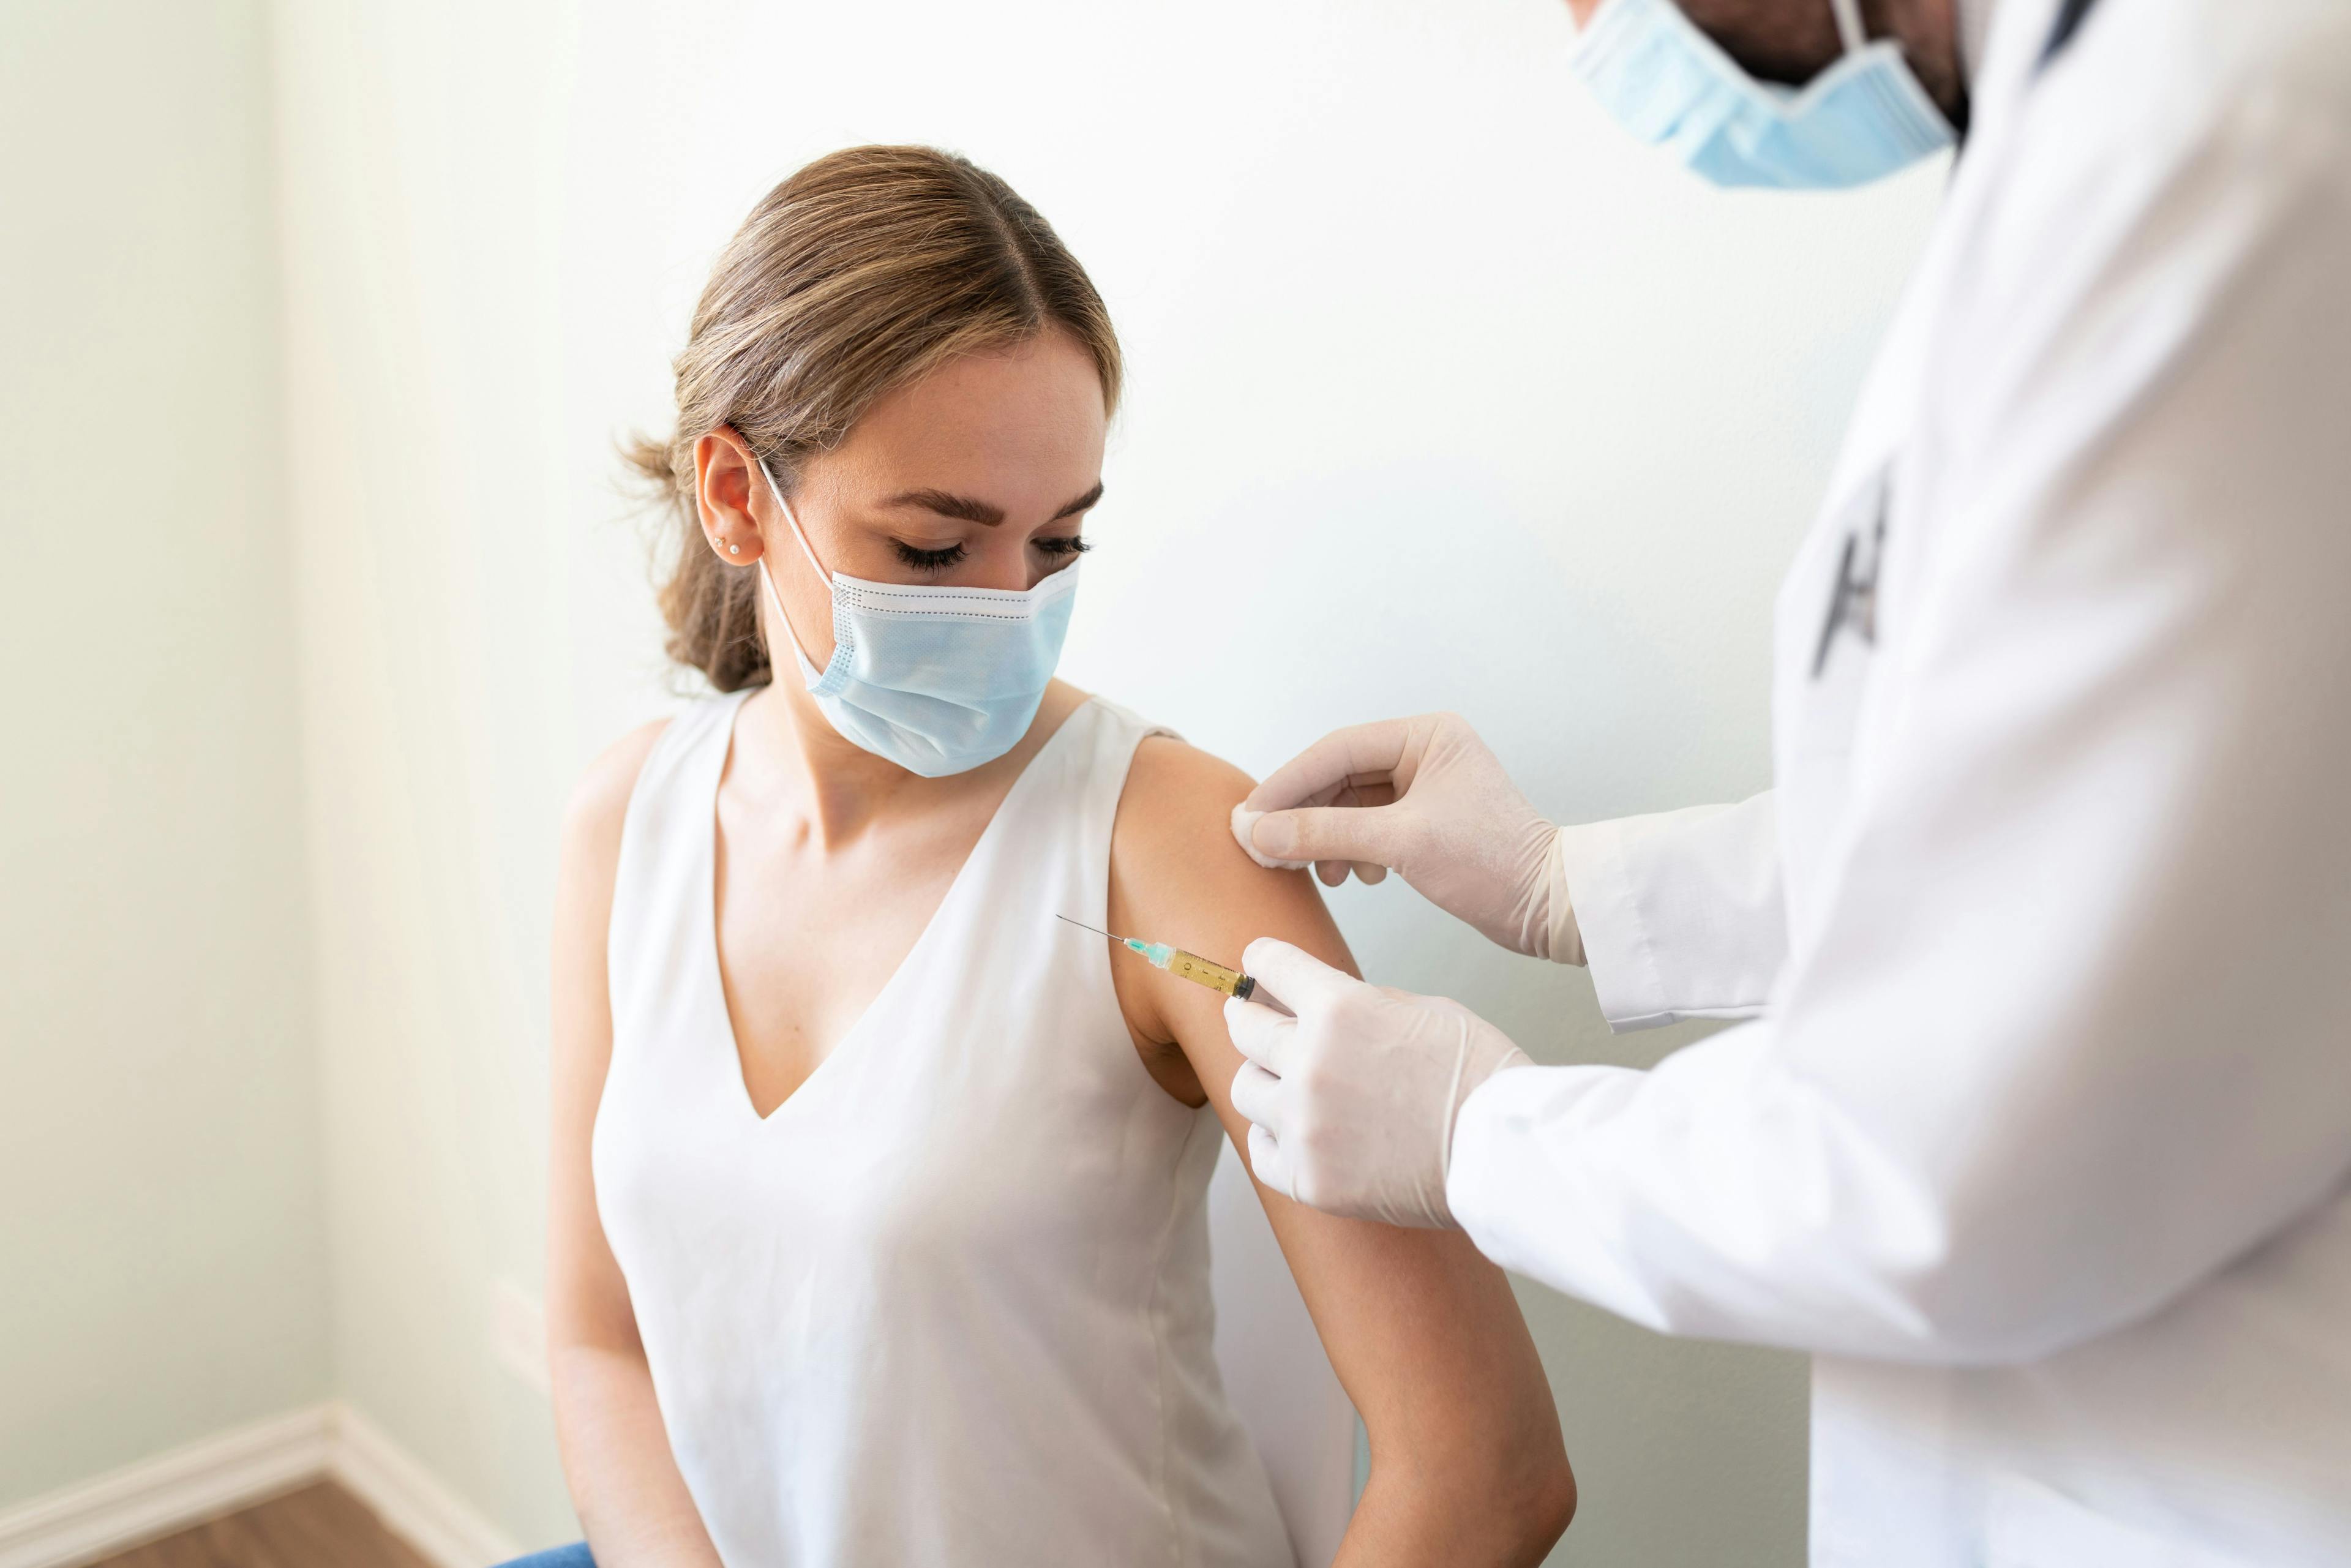 Training clinicians to improve HPV vaccination rates